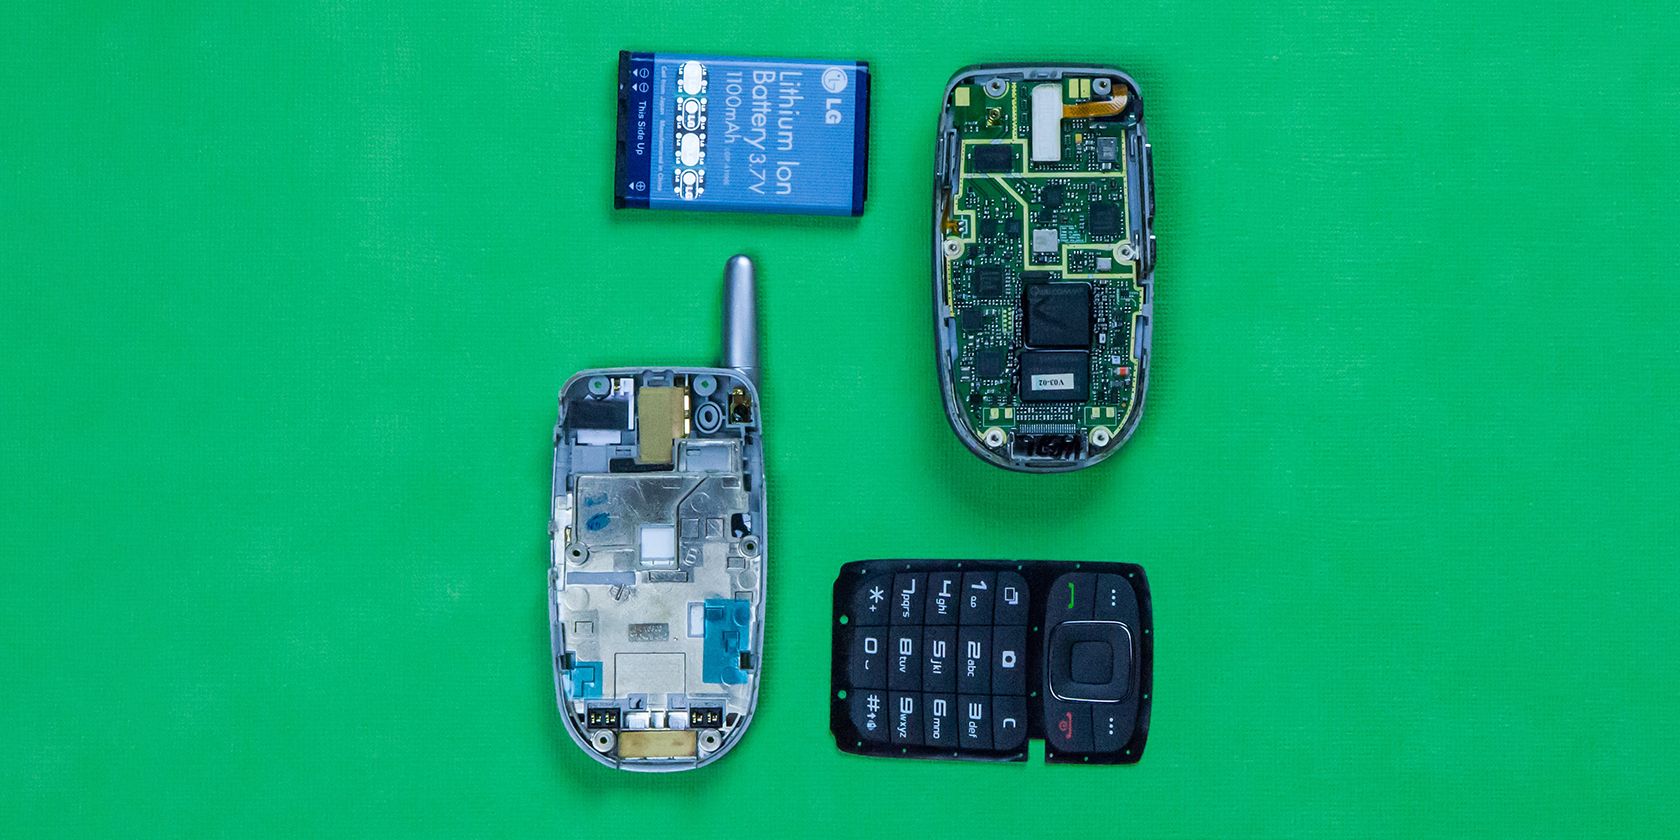 disassembled mobile phone showing its removable battery